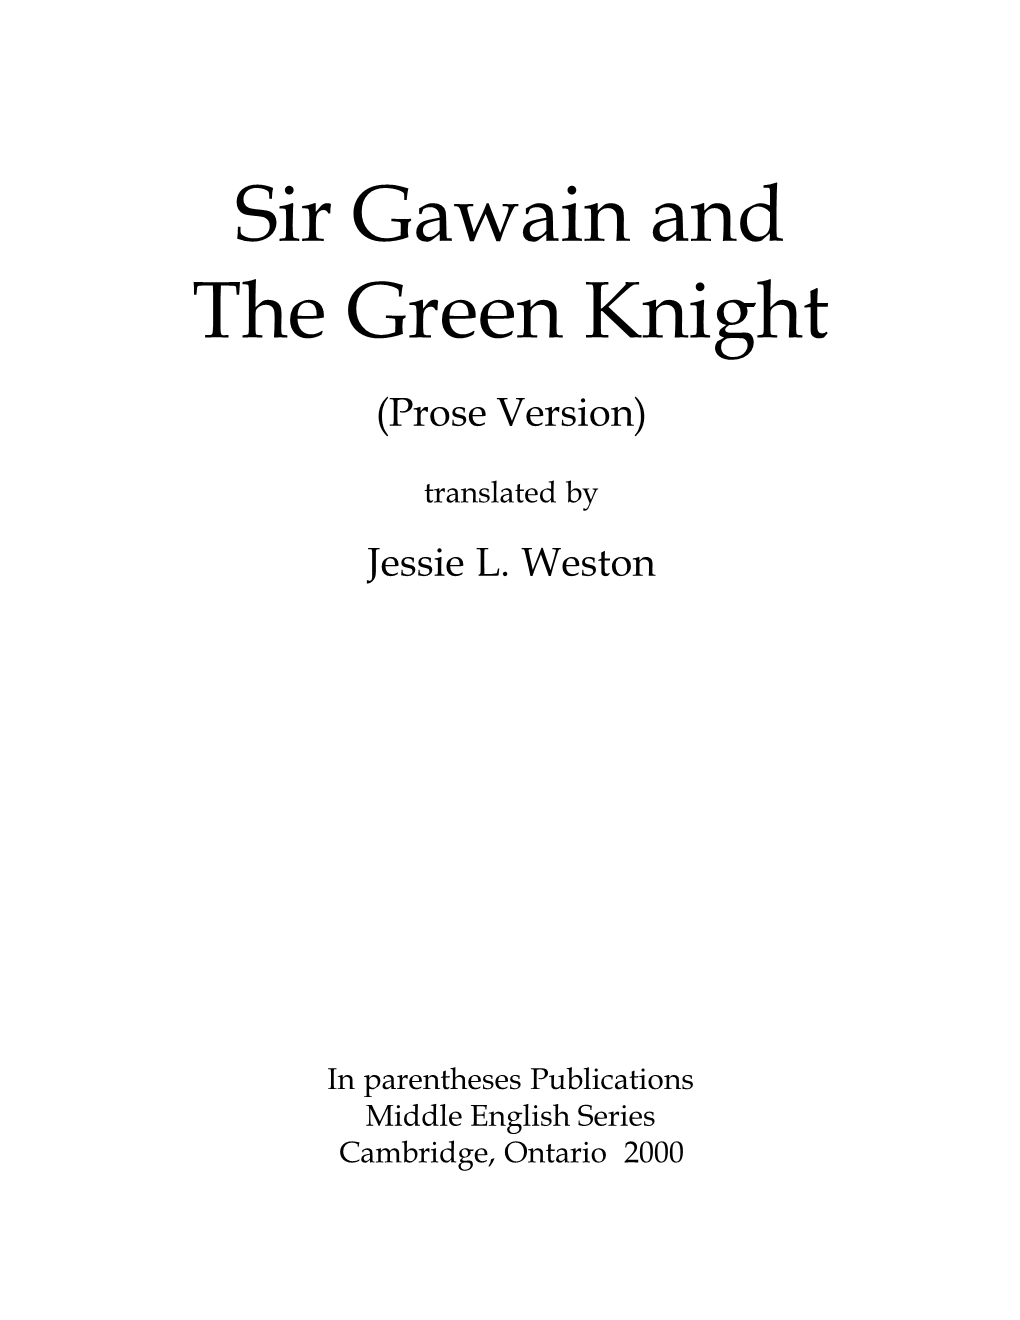 Sir Gawain and the Green Knight (Prose Version)